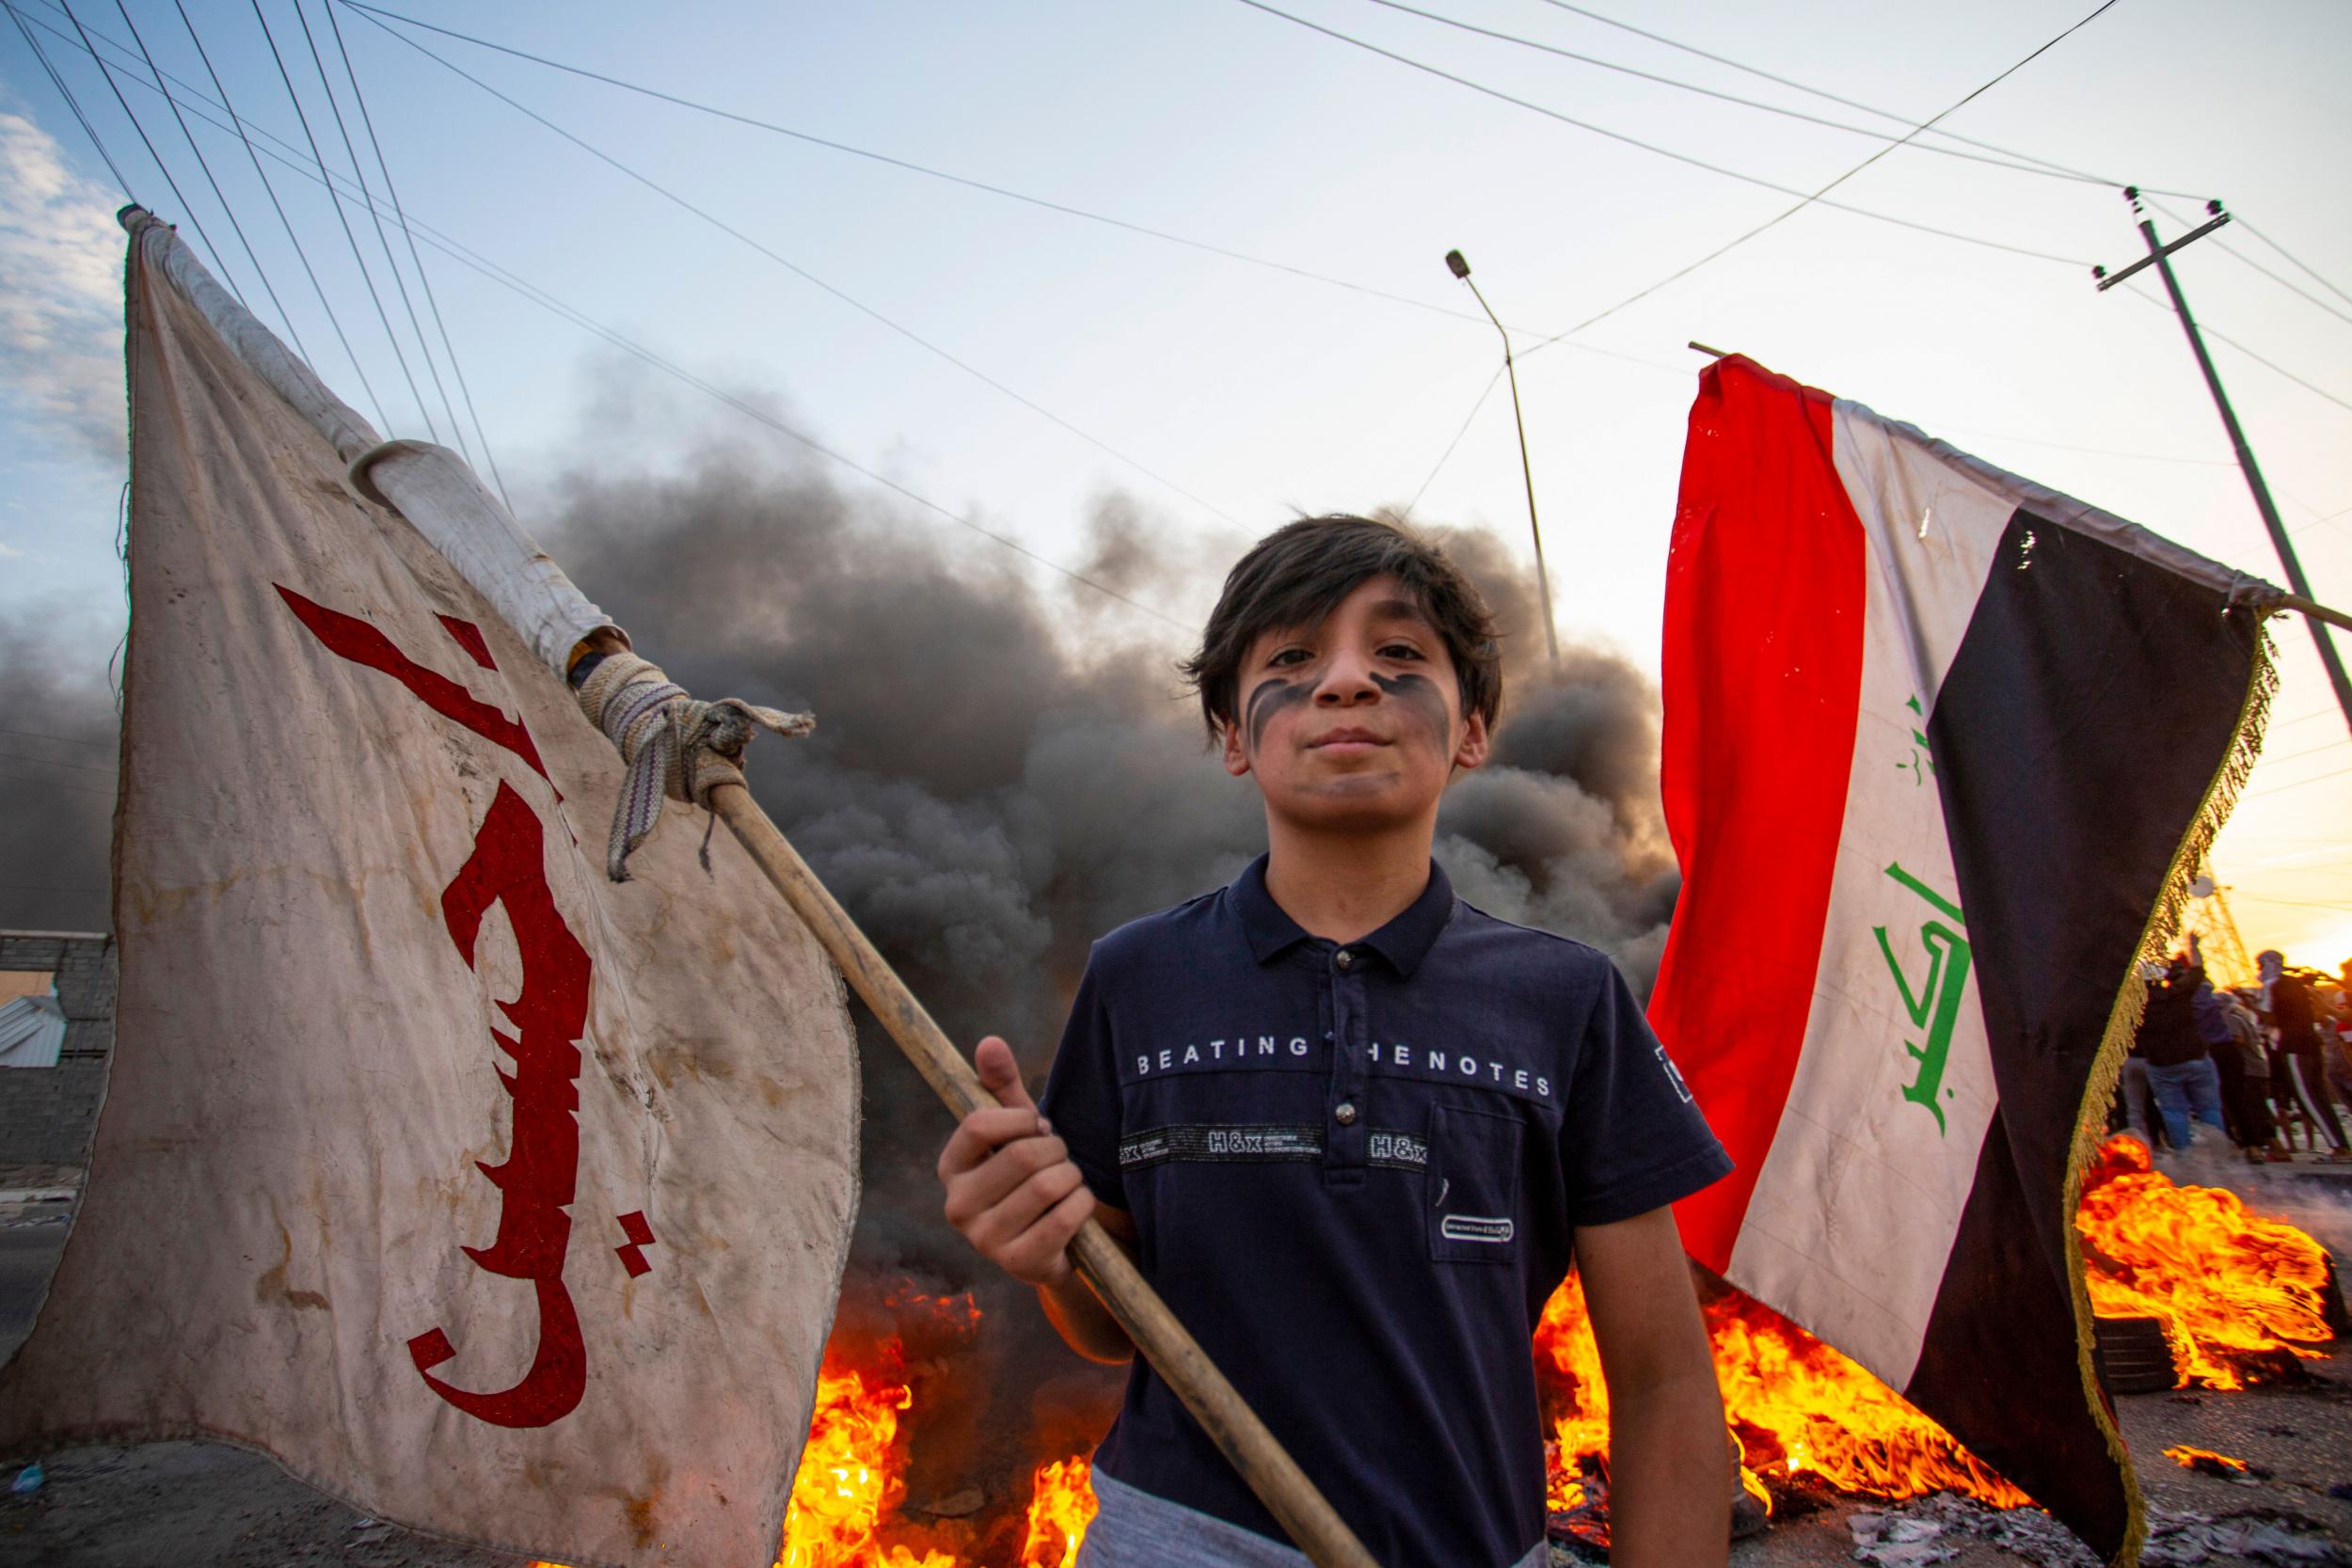 A demonstrator waves a flag during a protest in the southern city of Basra